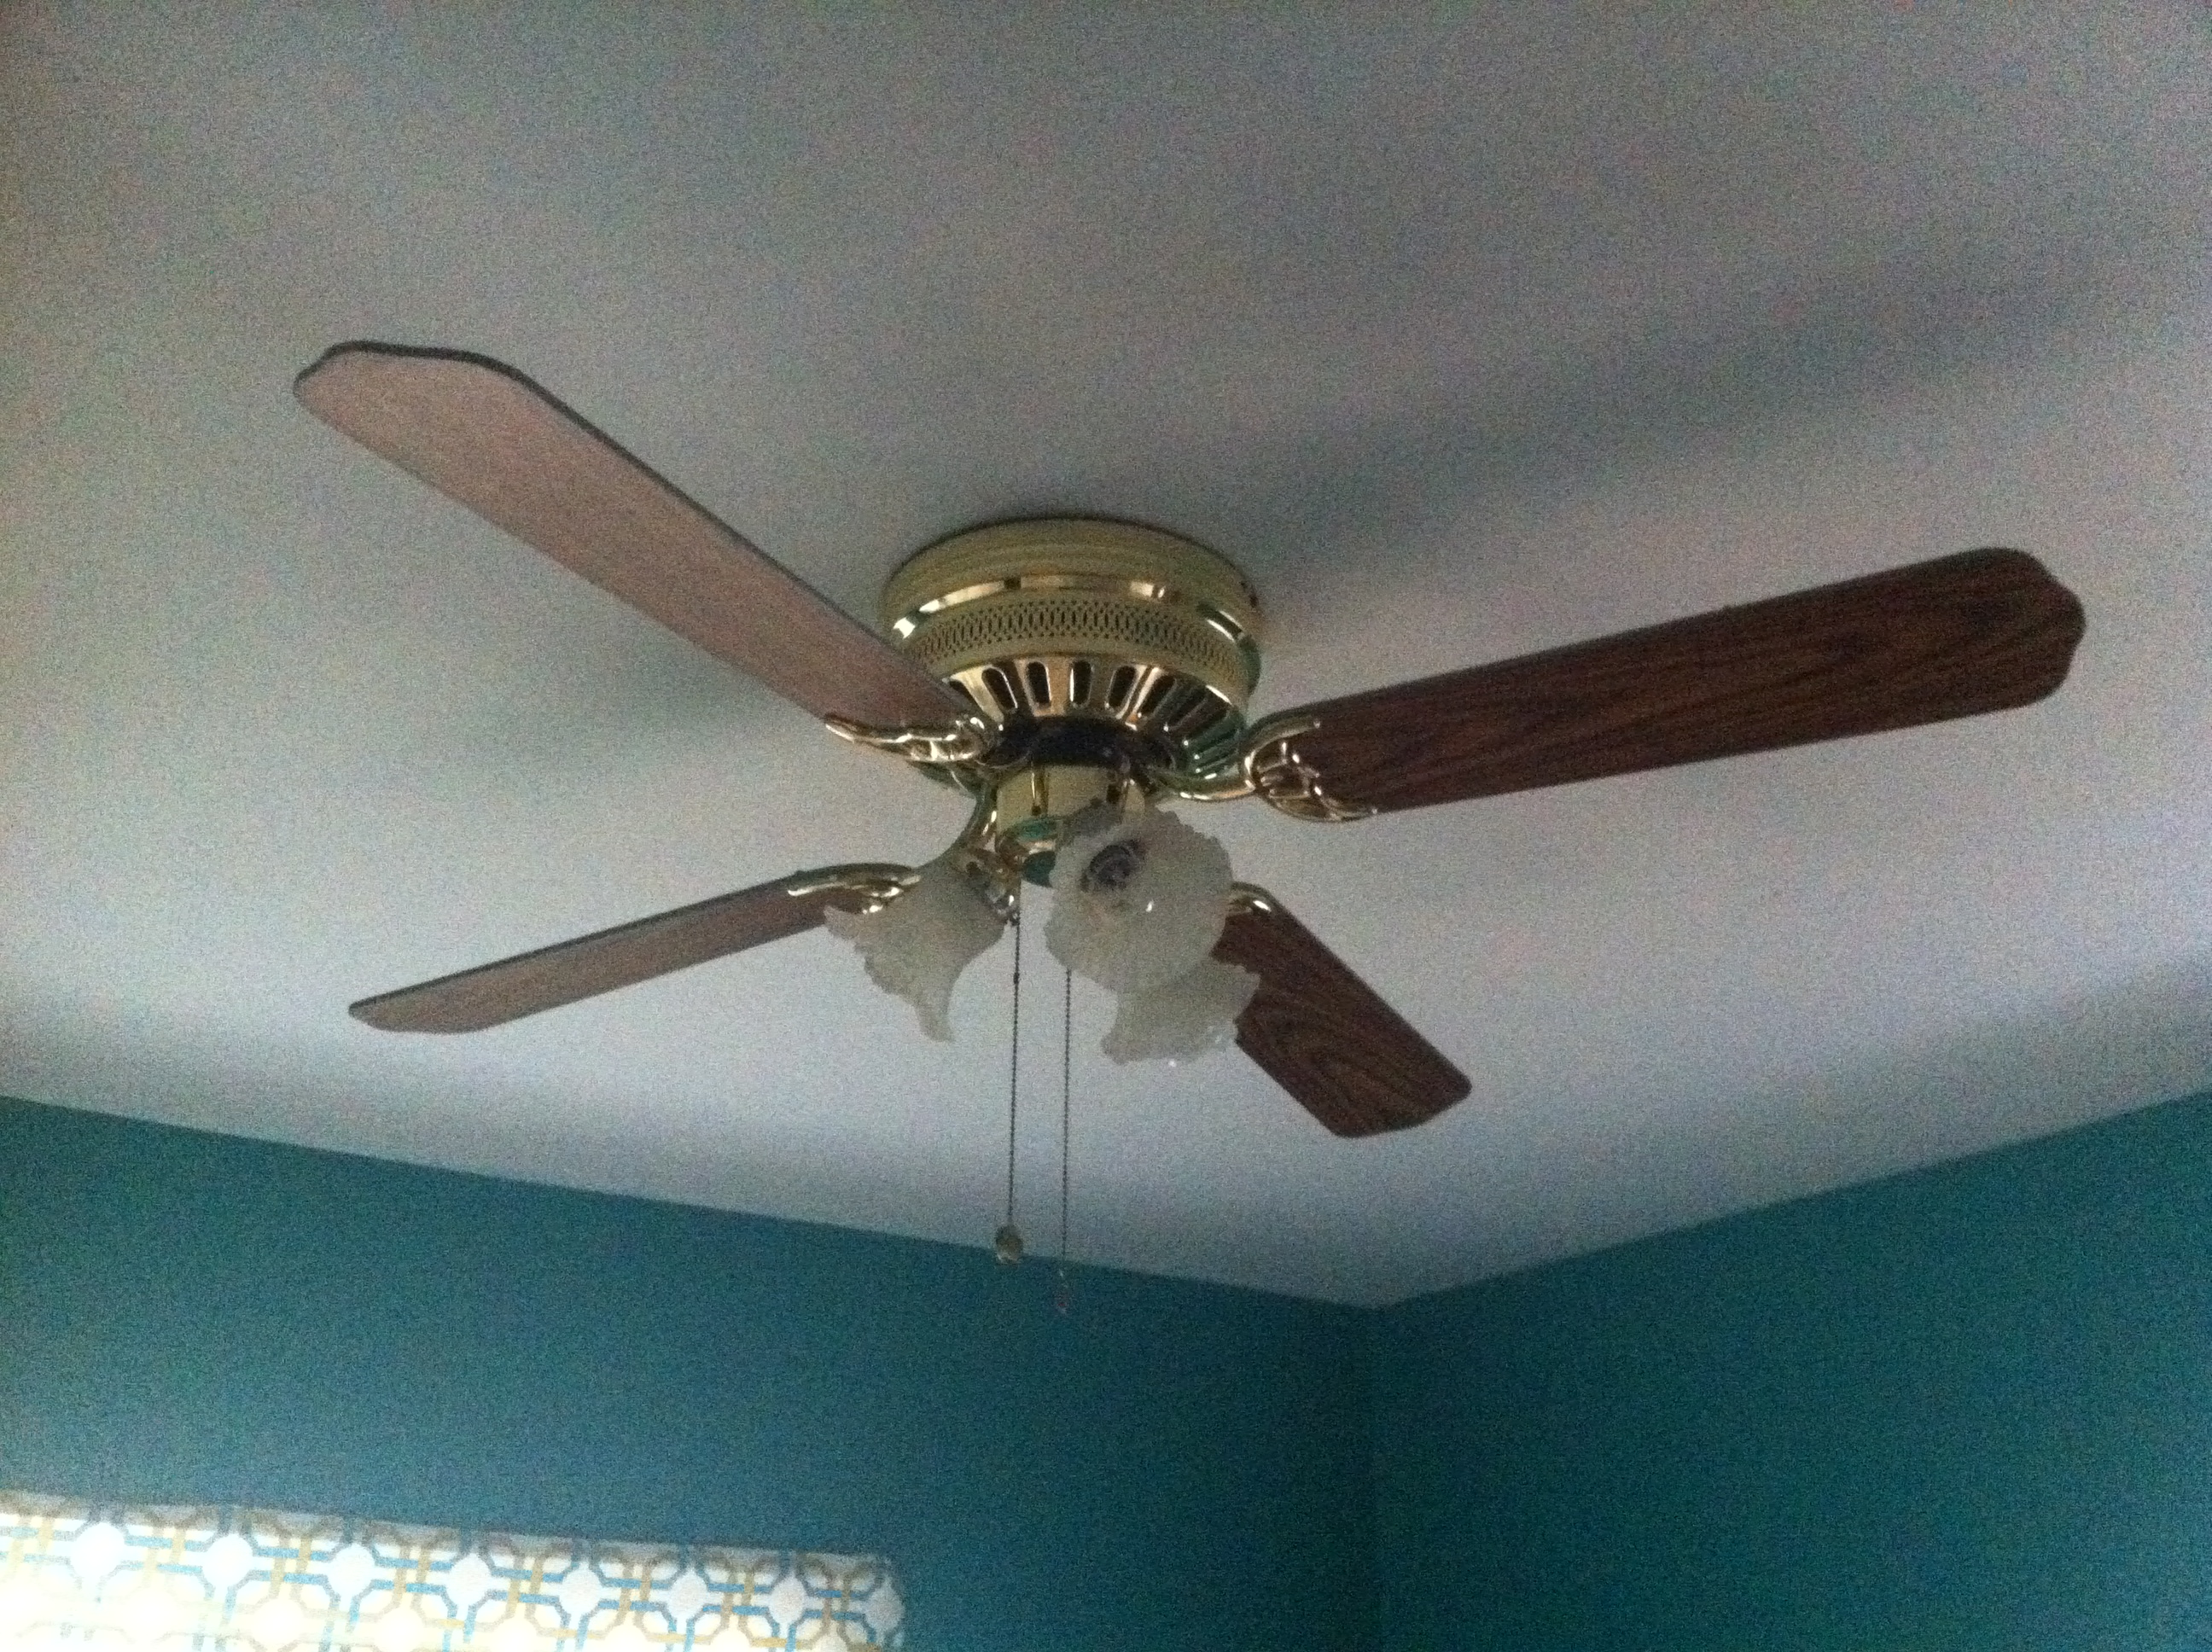 One of the perfectly ugly ceiling fans in question